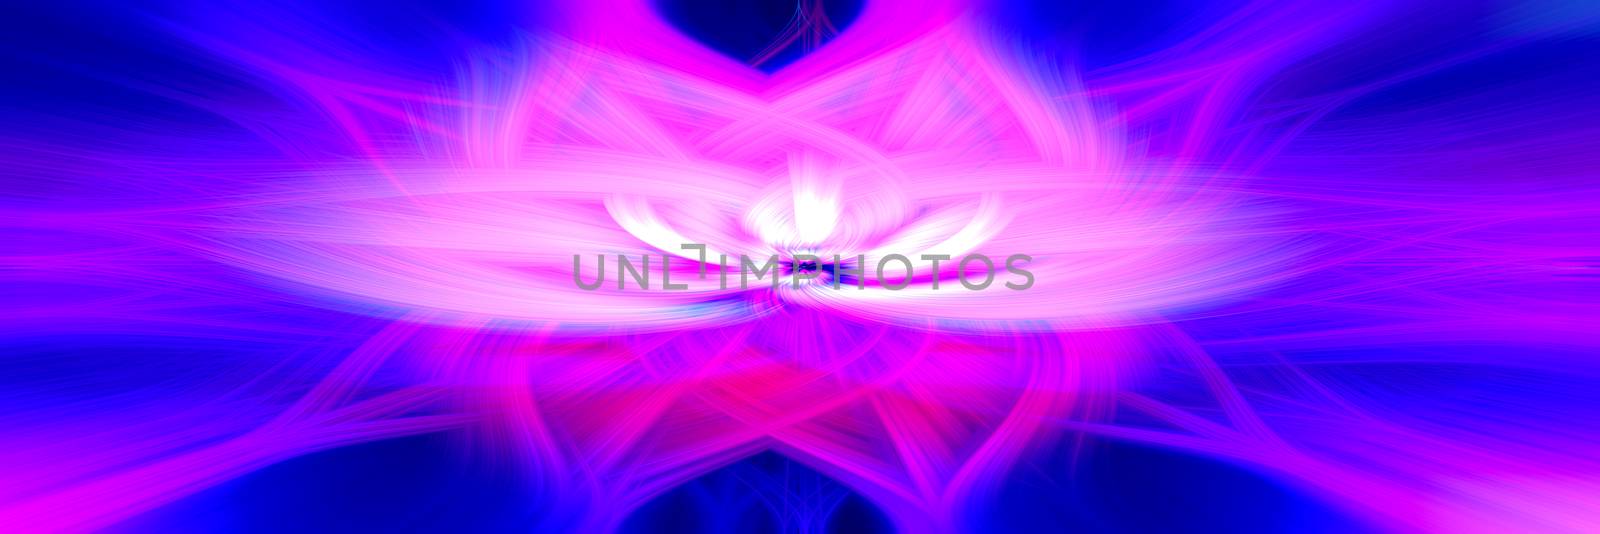 Beautiful abstract intertwined 3d fibers forming a shape of sparkle, flame, flower, interlinked hearts. Pink, purple, and blue colors. Illustration. Banner and panorama size.